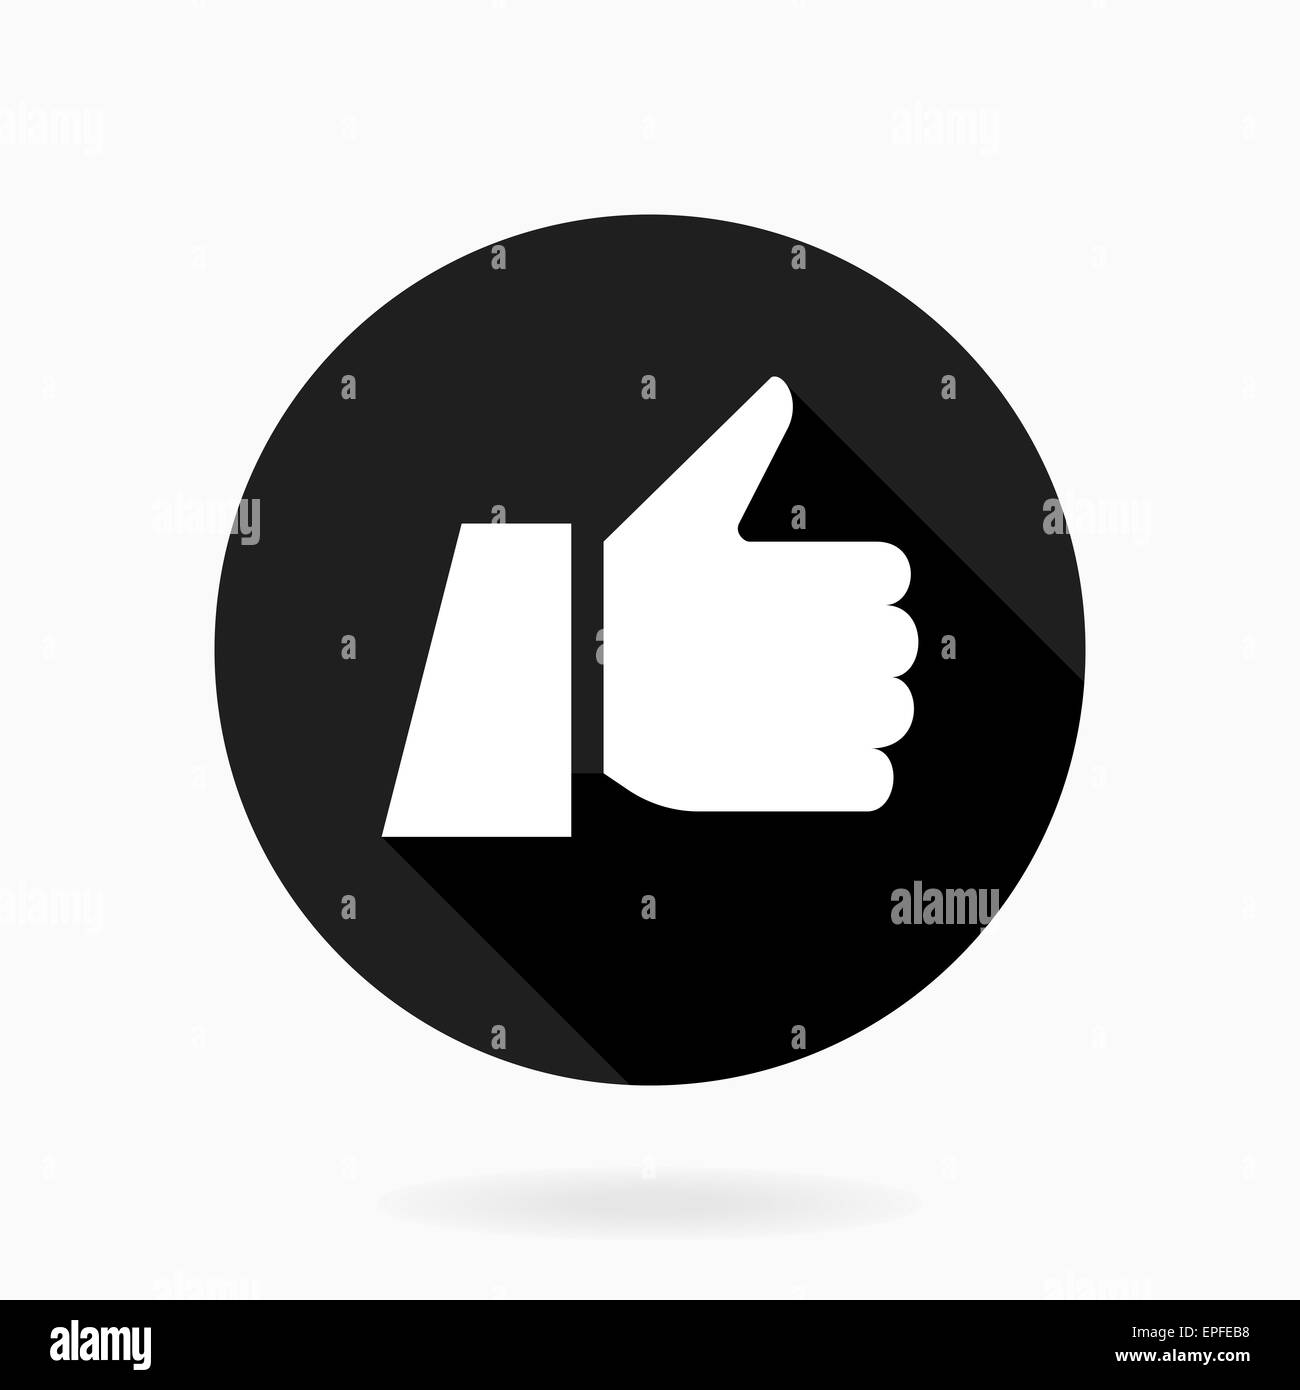 Fine  thumb up icon in the circle with shadow. Flat Style. Black and white colors Stock Photo